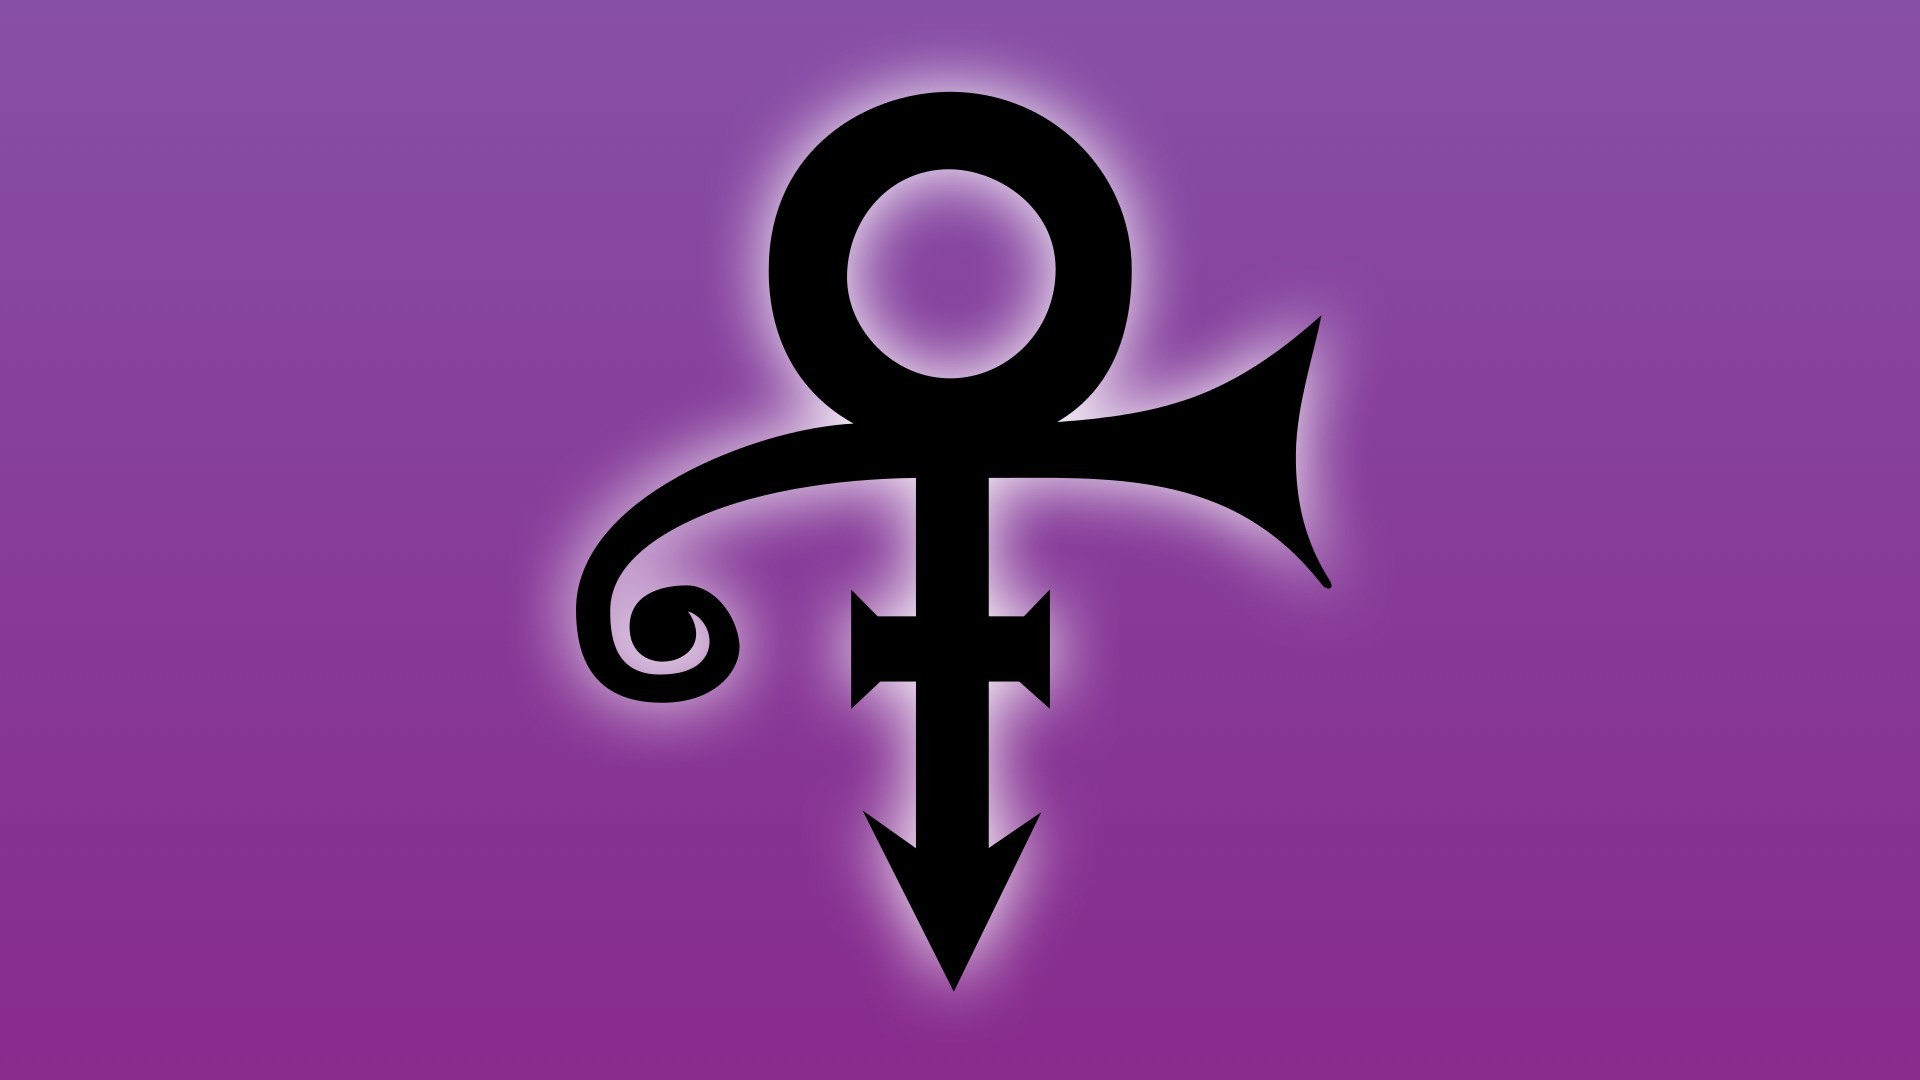 Prince as a Symbol for Abstraction